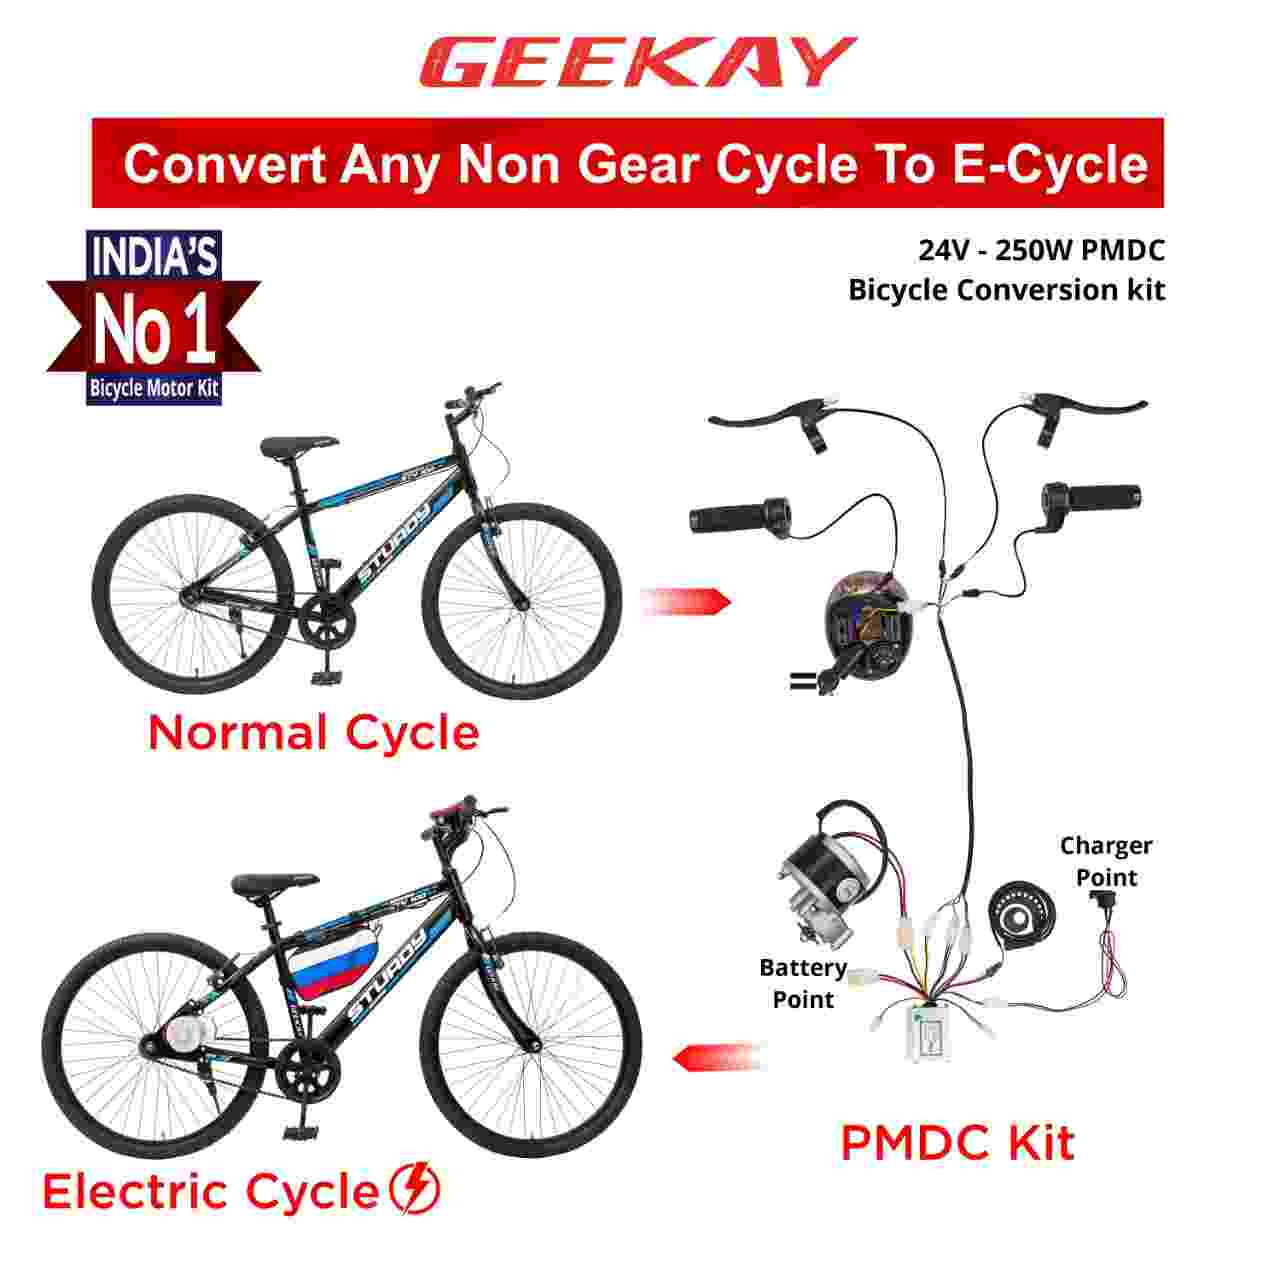 Geekay Electric cycle kit with battery